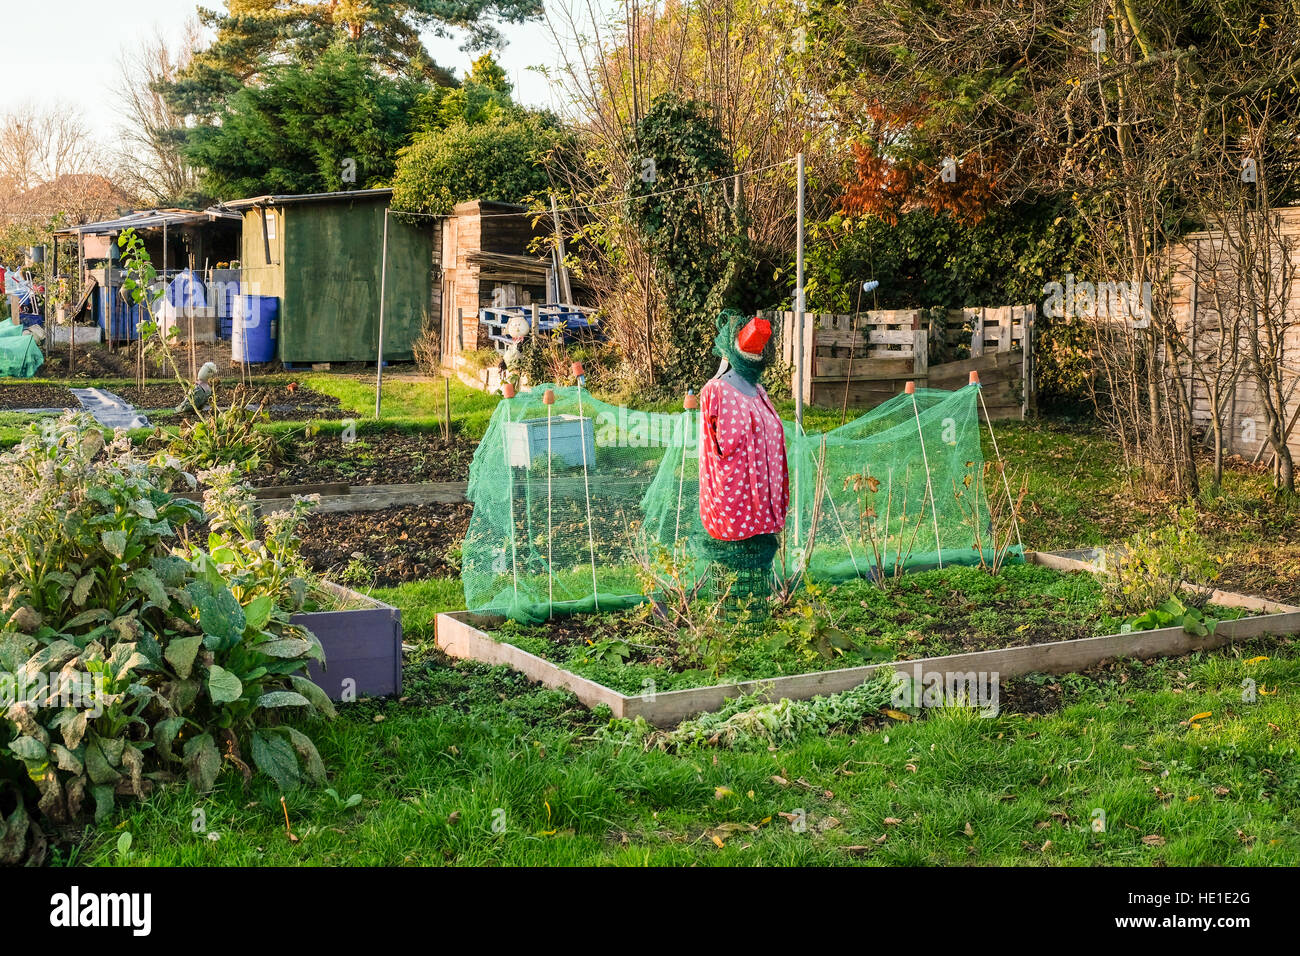 Allotments are small plots of land that you rent and cultivate yoursellf.  This plot has a modern scarecrow to fend off the birds. Stock Photo